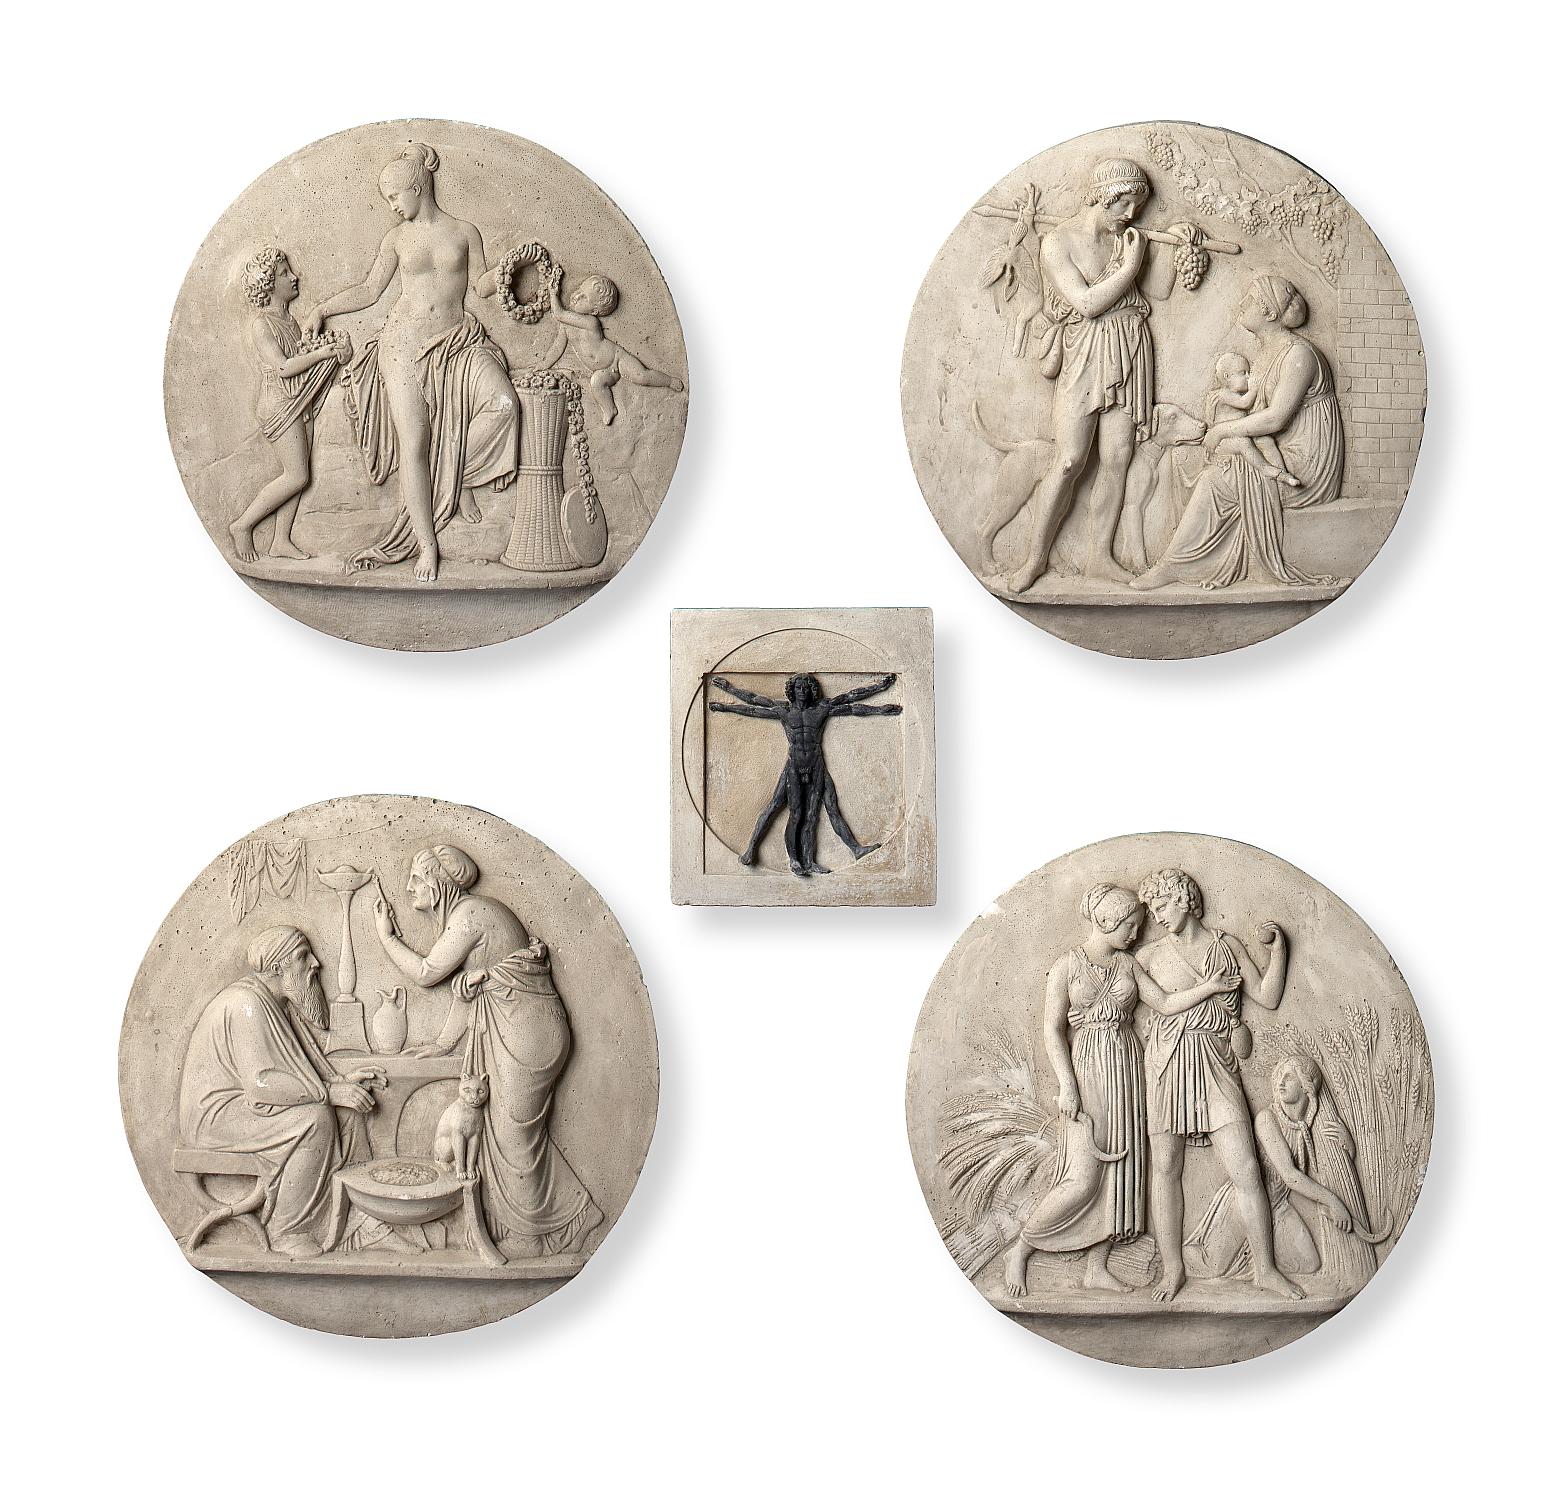 † After Thorwaldson: A set of four plaster roundels representing the Seasons and the Ages of